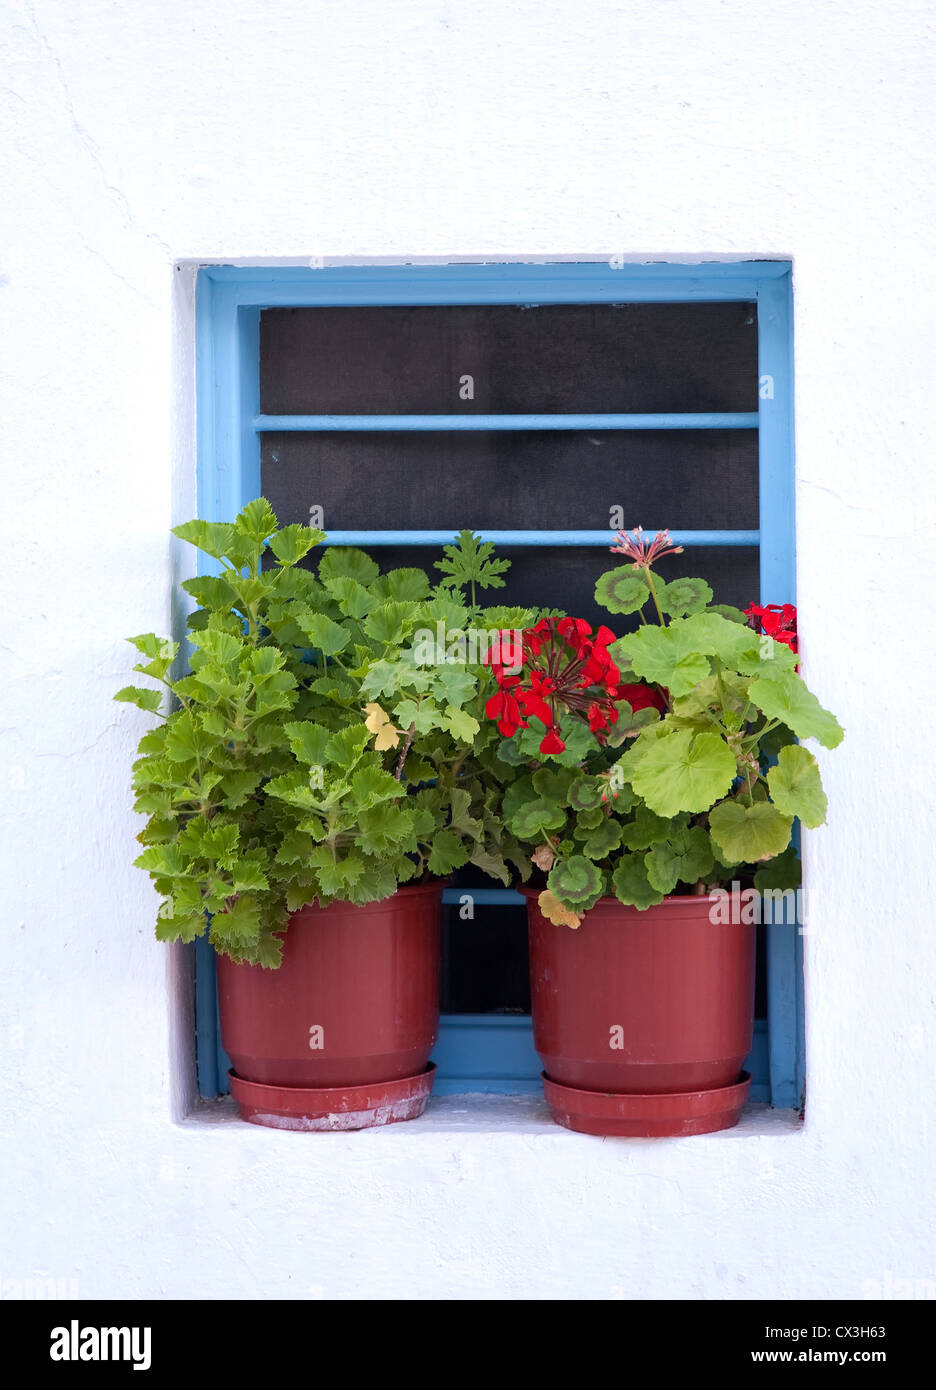 Geraniums sitting on a window of a traditional style home with a white stucco exterior on the island of Mykonos, Greece. Stock Photo